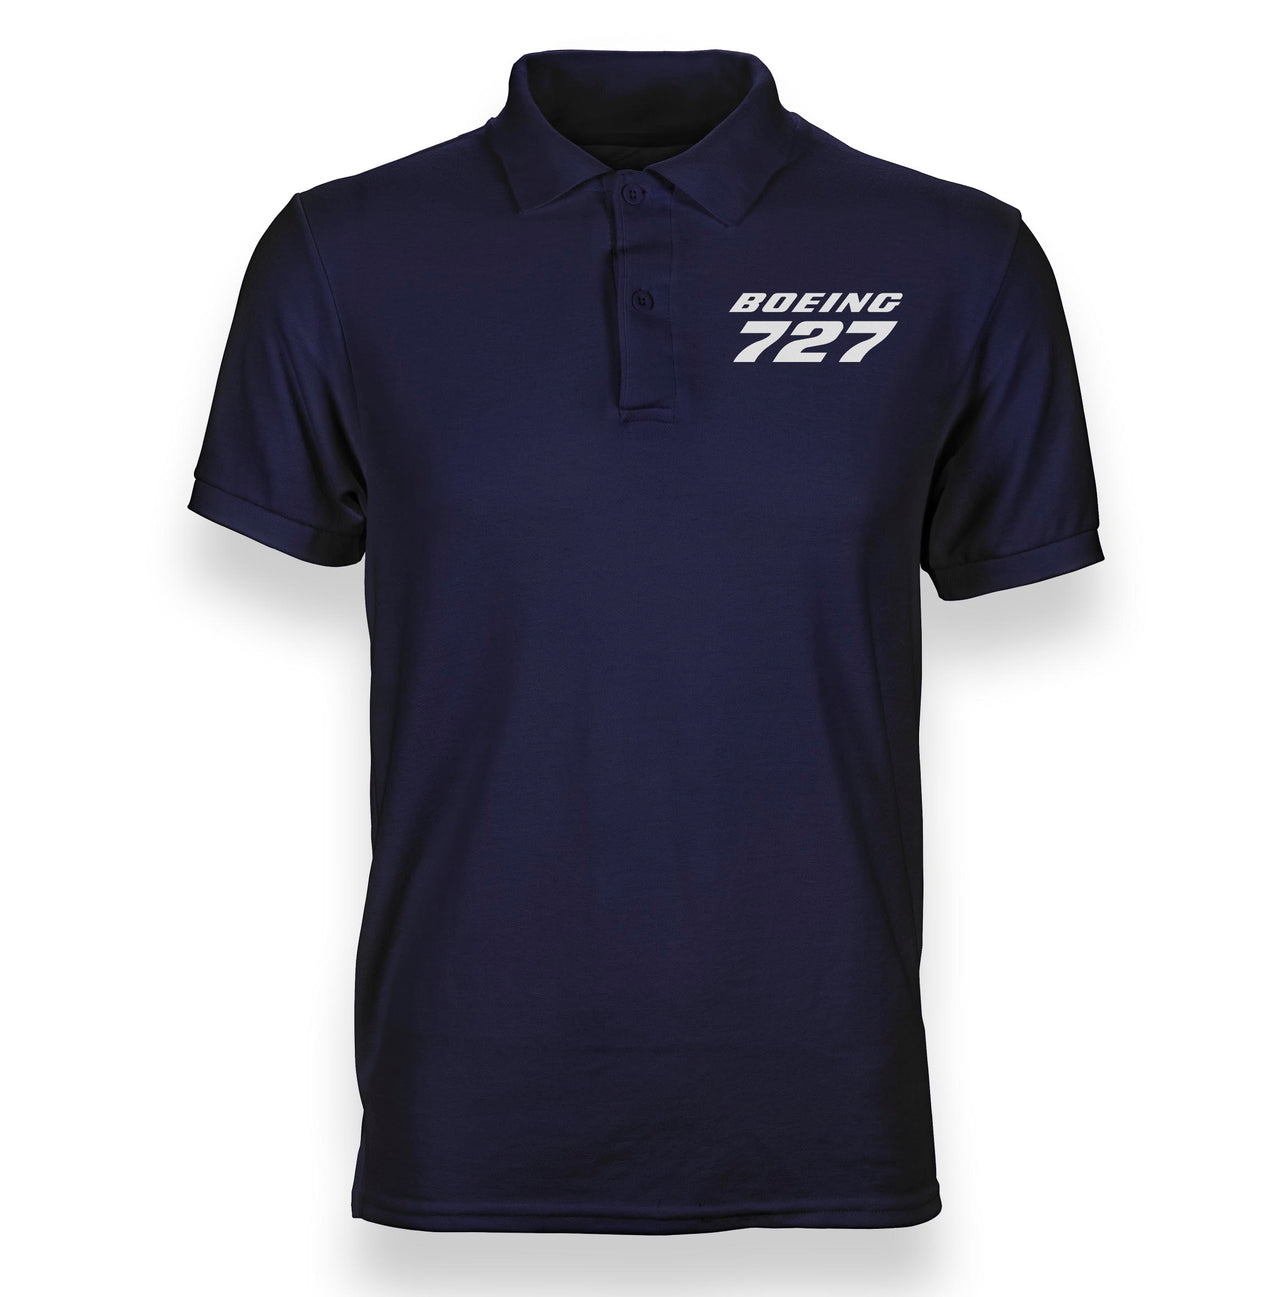 Boeing 727 & Text Designed Polo T-Shirts